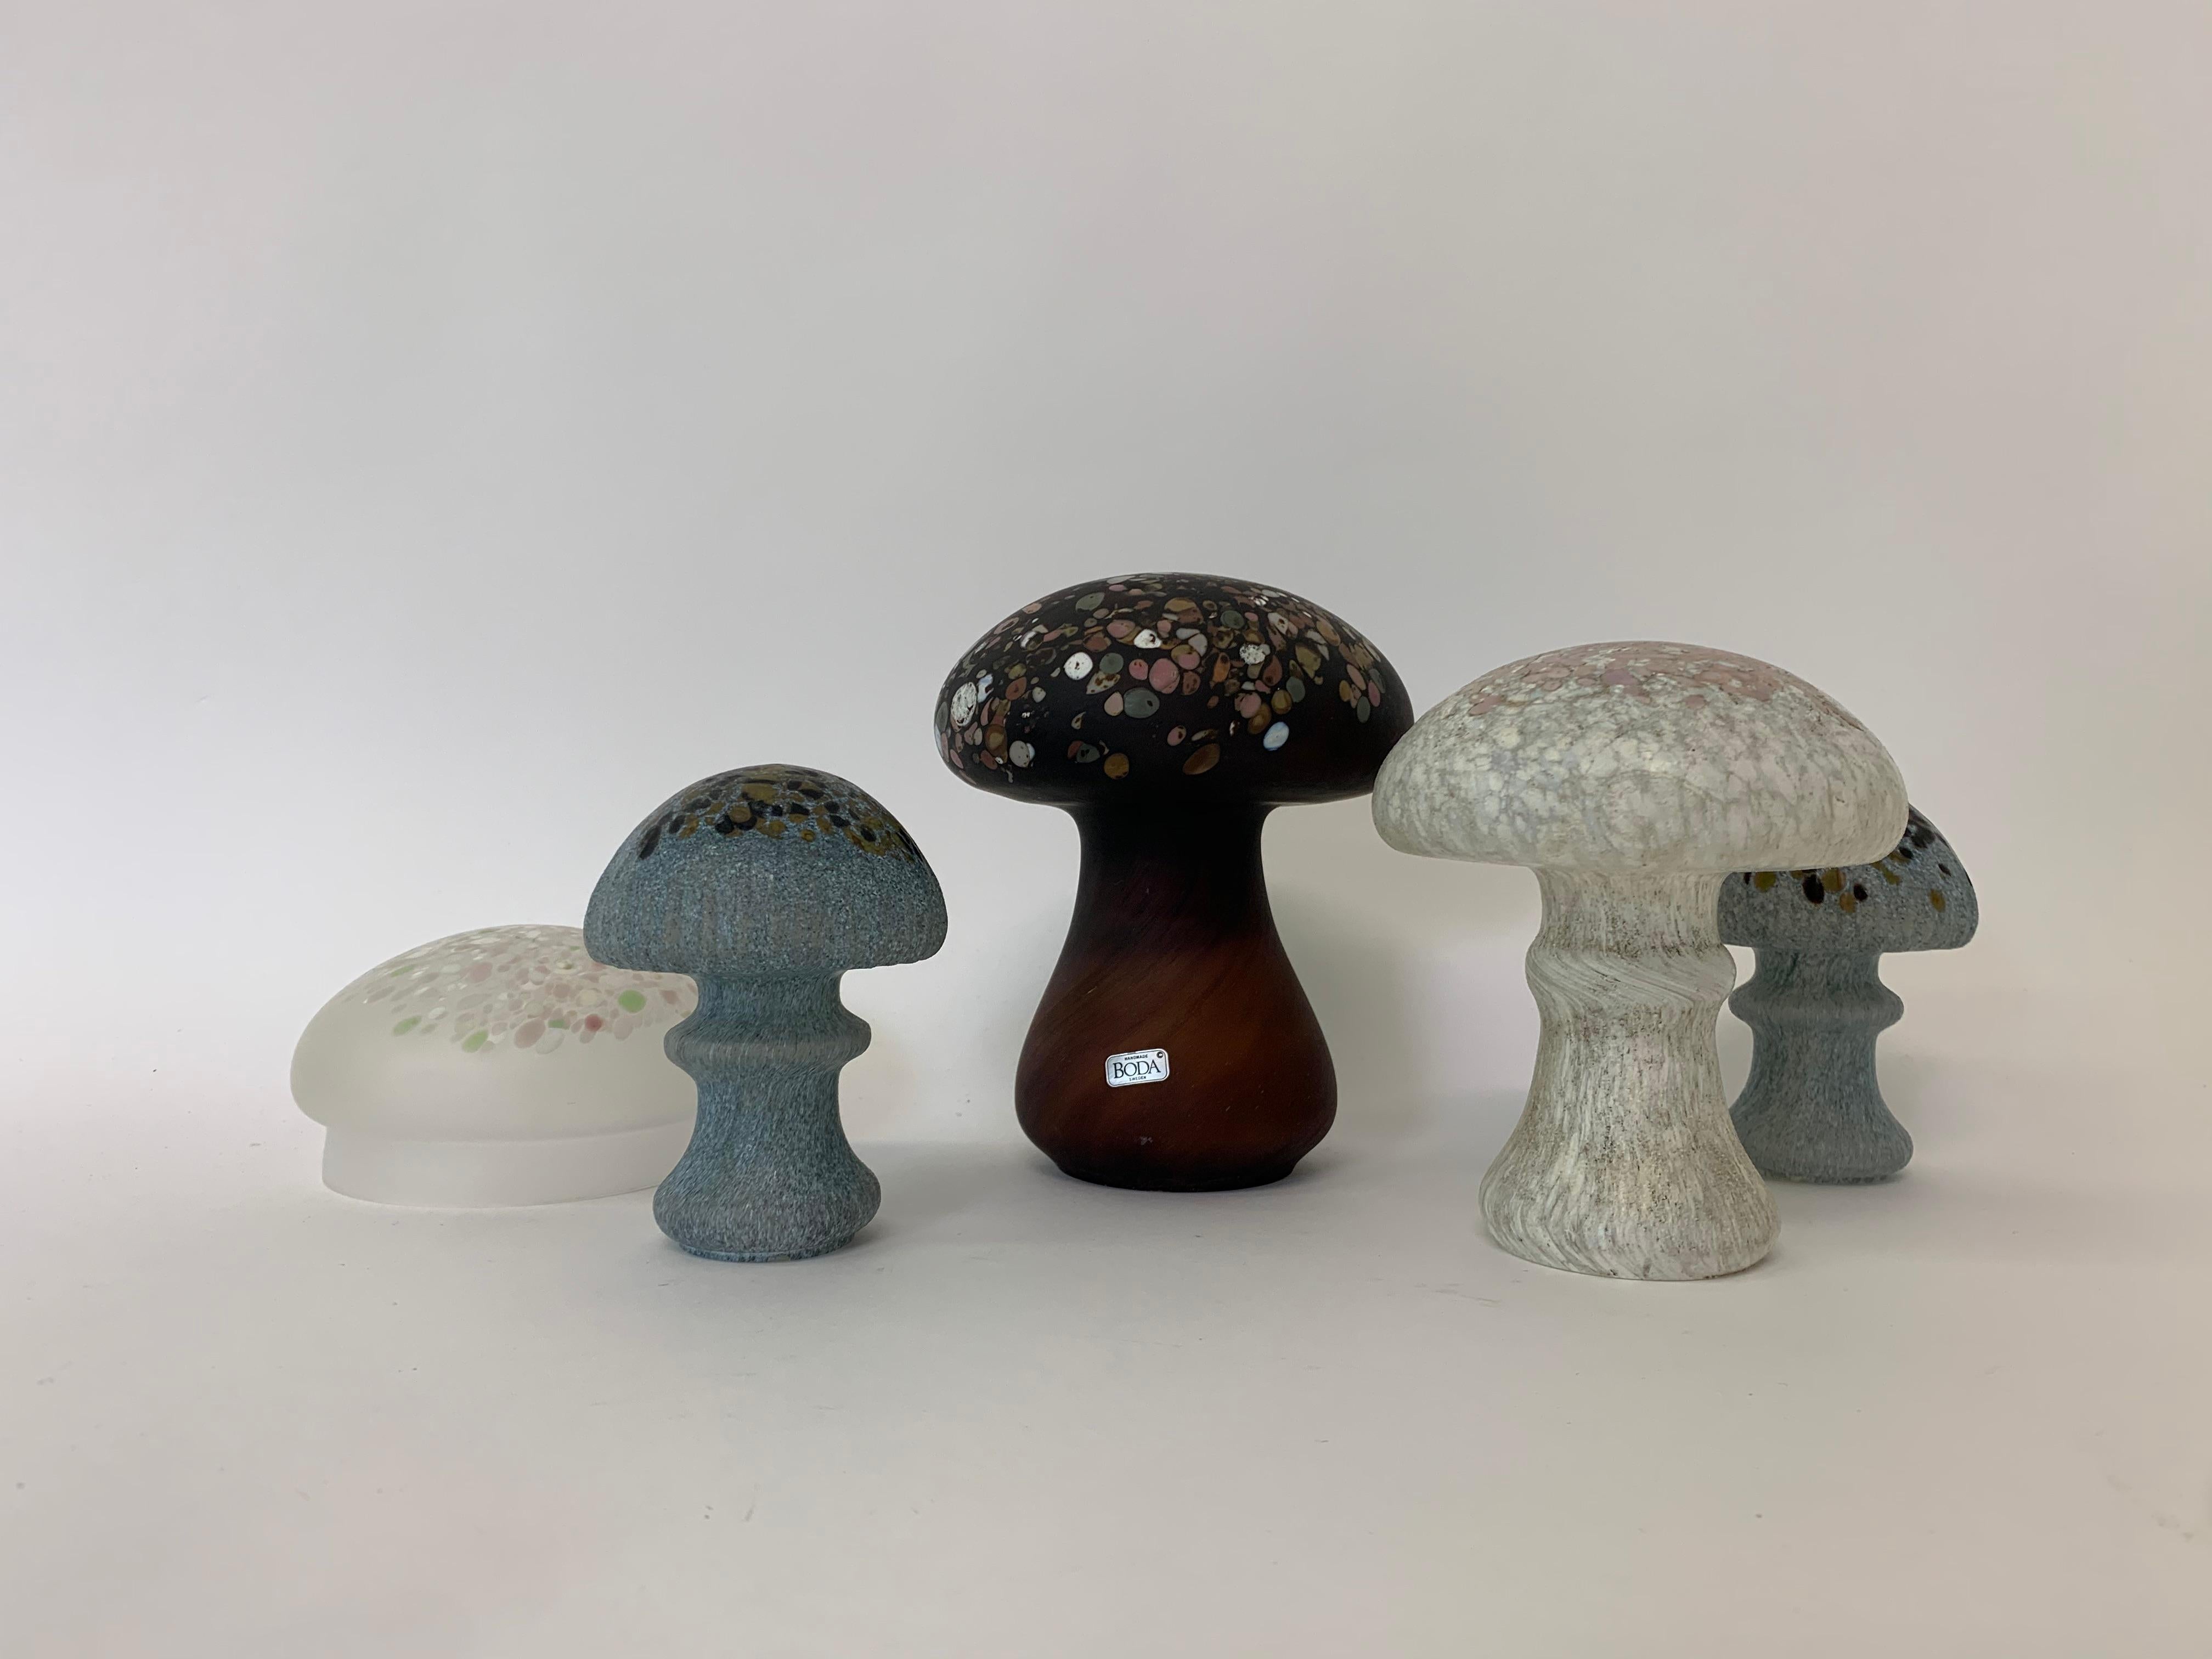 Dimensions:
From left to right 1st photo:
White : 11cm diameter , 6cm Height
Blue : 10,5cm Height 7,5cm Diameter
Brown: 16cm Heigth , 12cm Diameter
White: 13cm Height, 10,5cm Diameter
Blue: 10,5cm Height 7,5cm Diameter
Condition: Mint , one blue